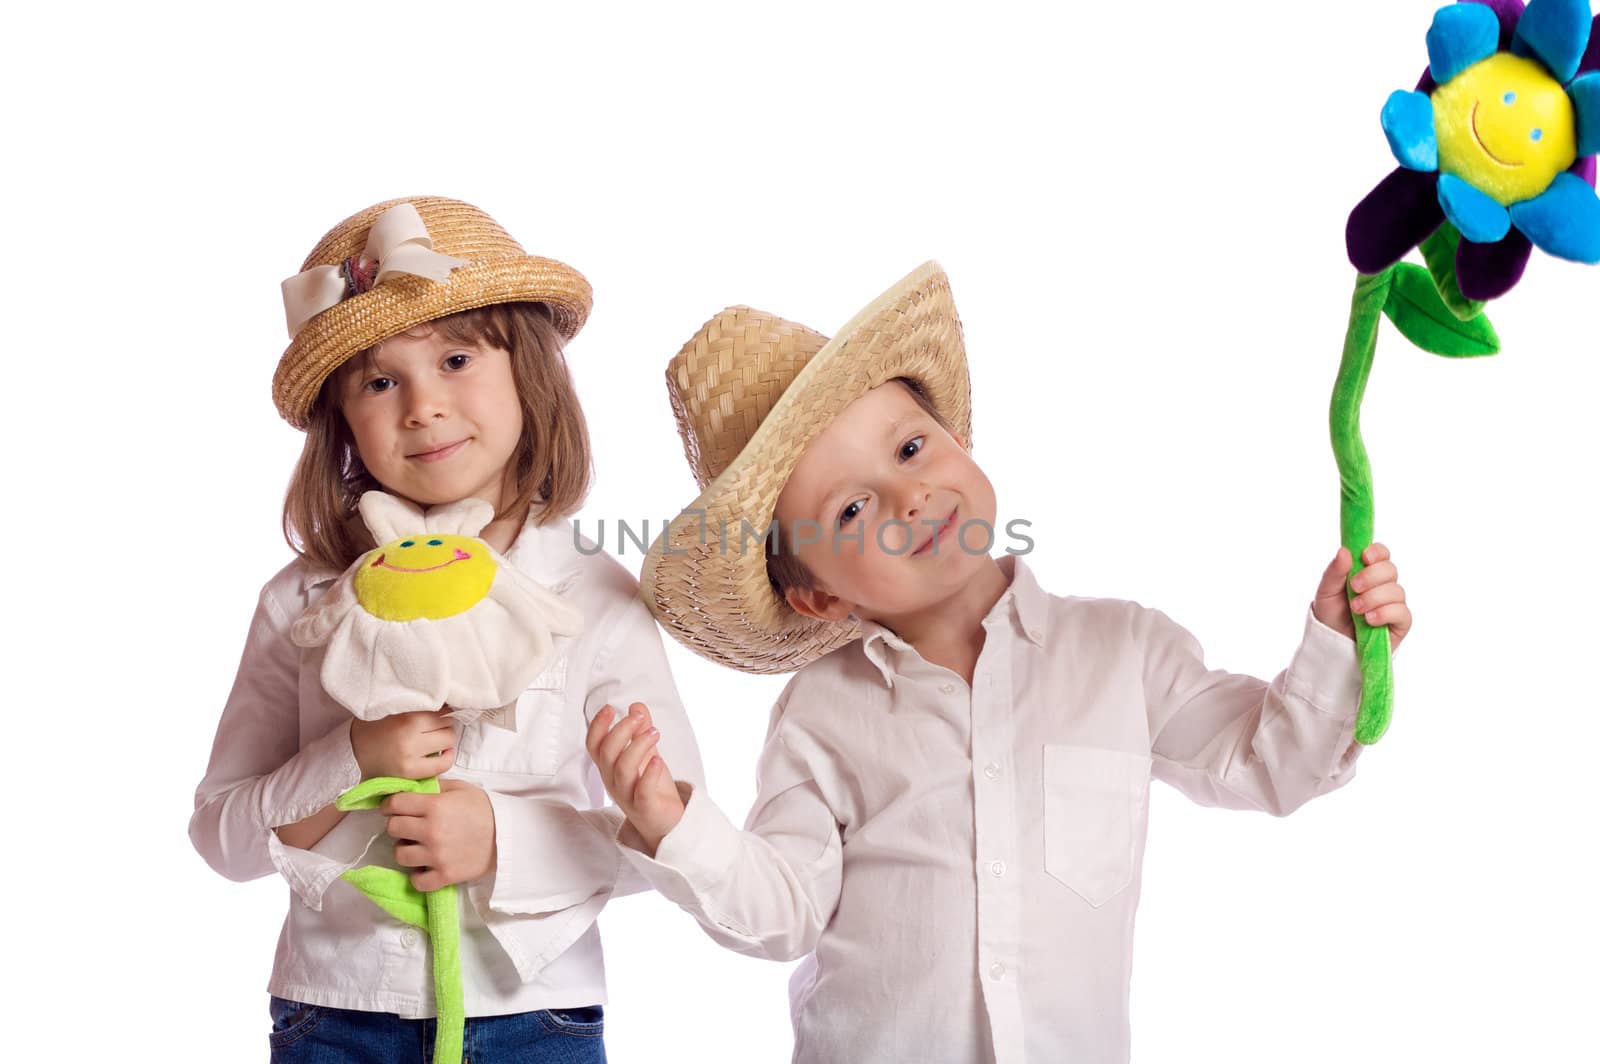 Cute little brother and sister playing with hats and flowers